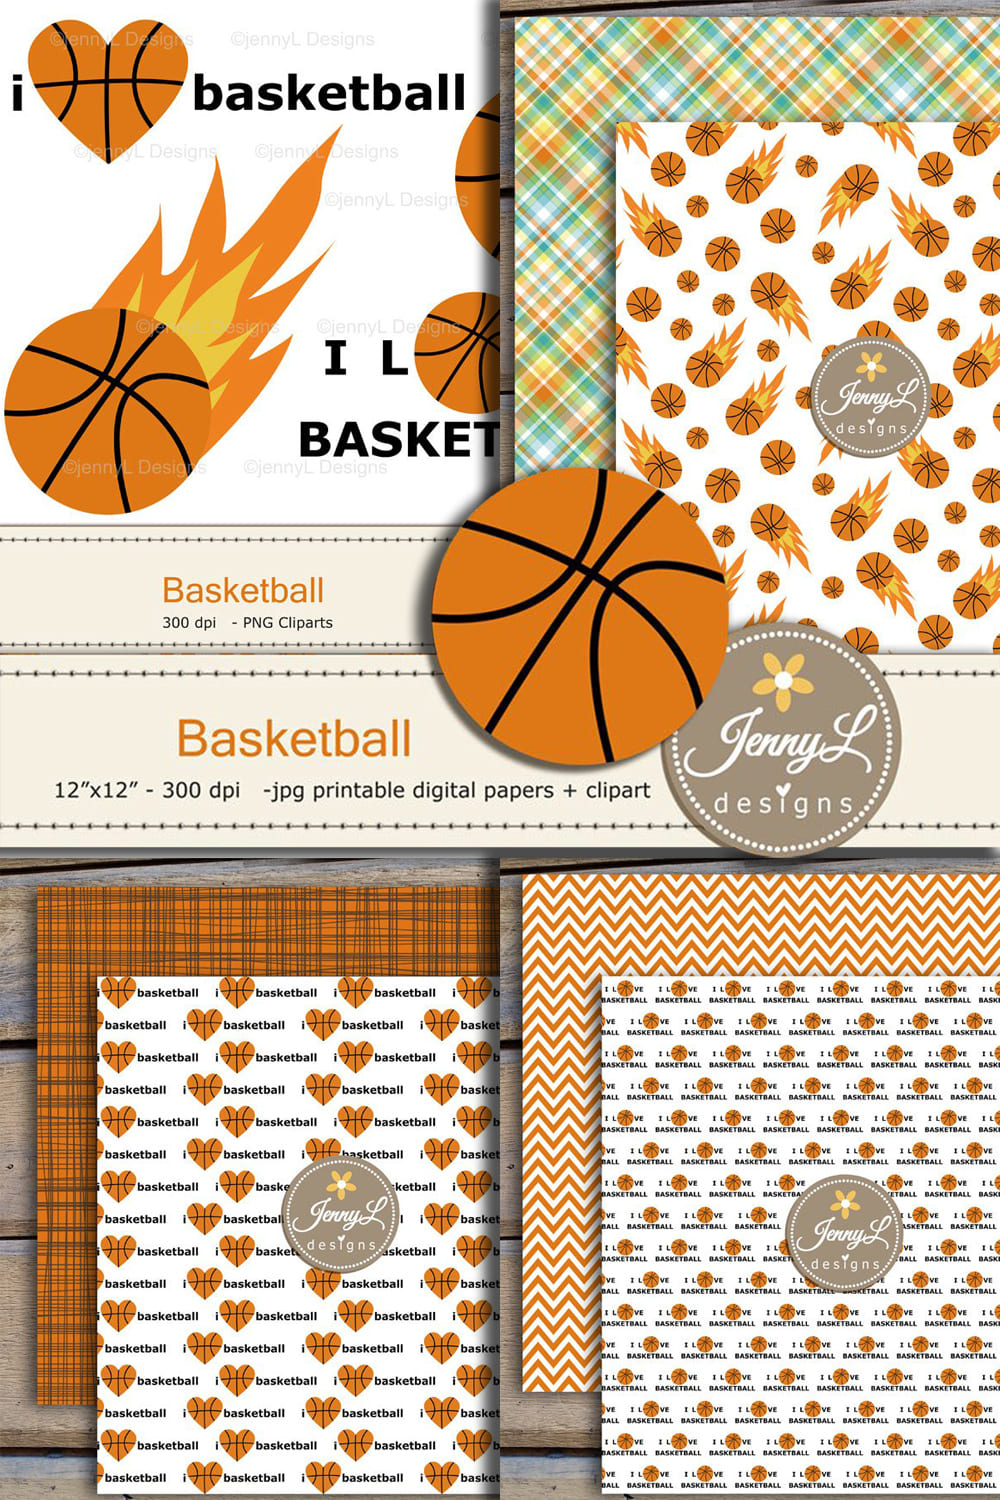 Basketball Digital Papers and Clipart - pinterest image preview.